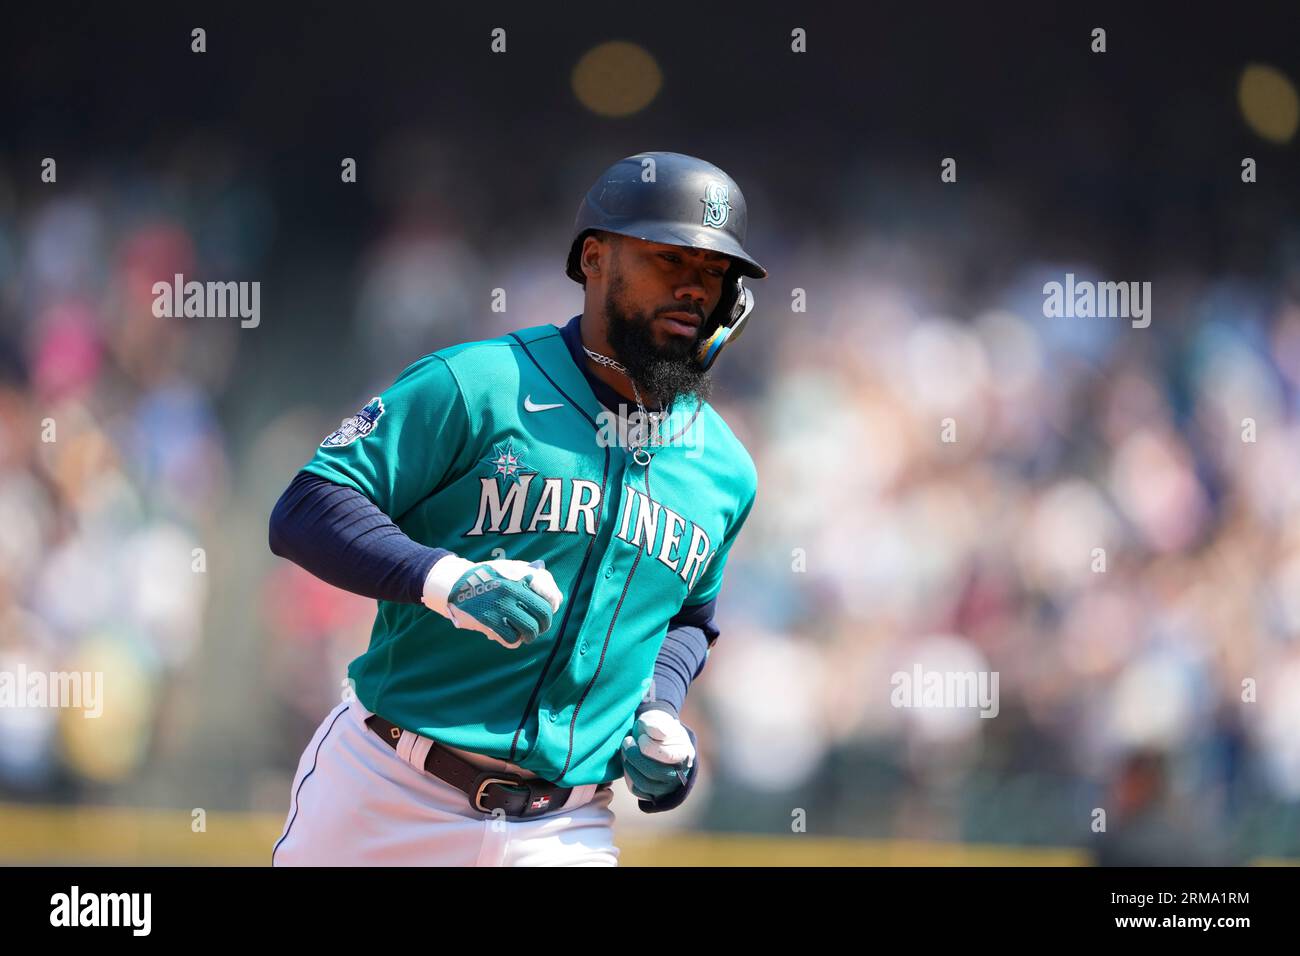 Seattle Mariners' Teoscar Hernandez tries to avoid being doused following a  15-2 win after a baseball game against the Kansas City Royals Saturday,  Aug. 26, 2023 in Seattle. (AP Photo/Lindsey Wasson Stock